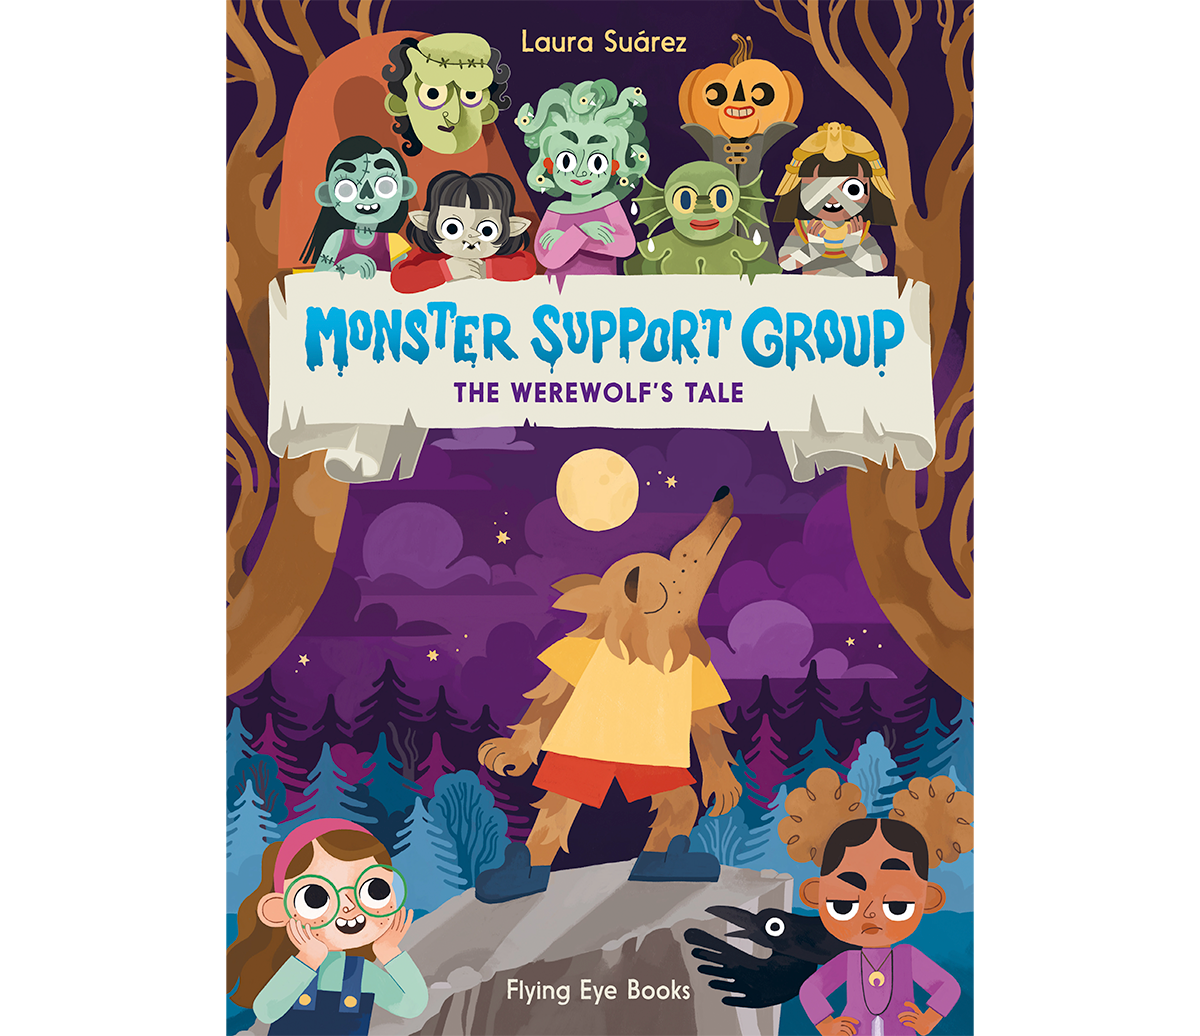 laura-suarez-monster-support-group-cover-1.png